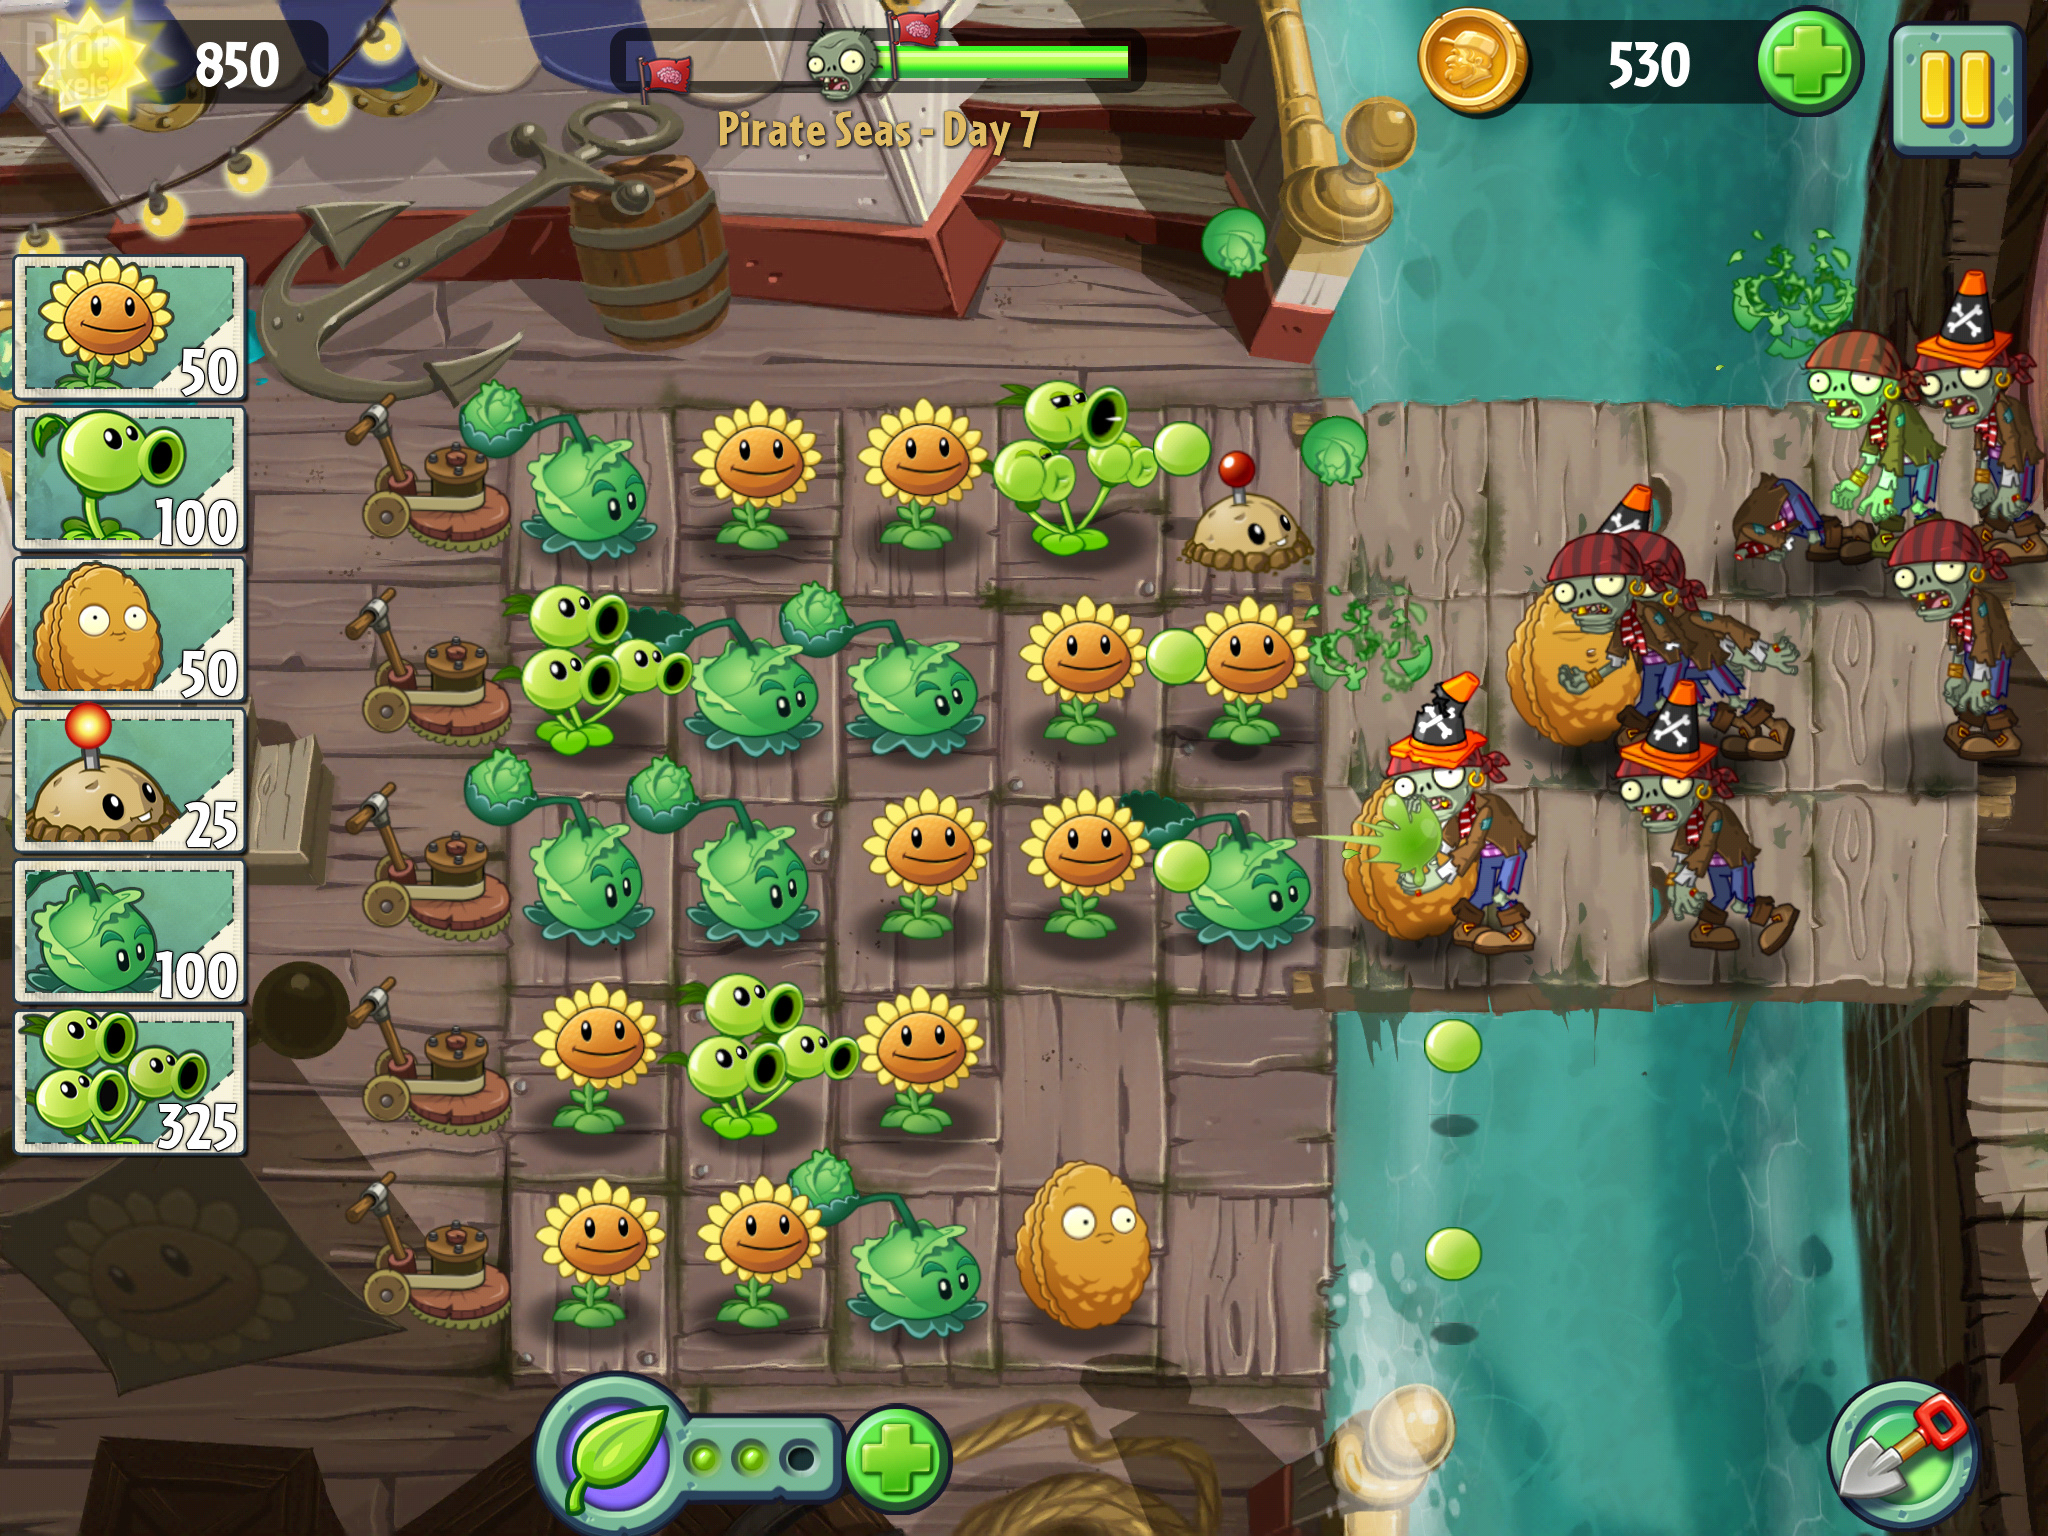 Plants vs. Zombies 2: It's About Time - game screenshots at Riot